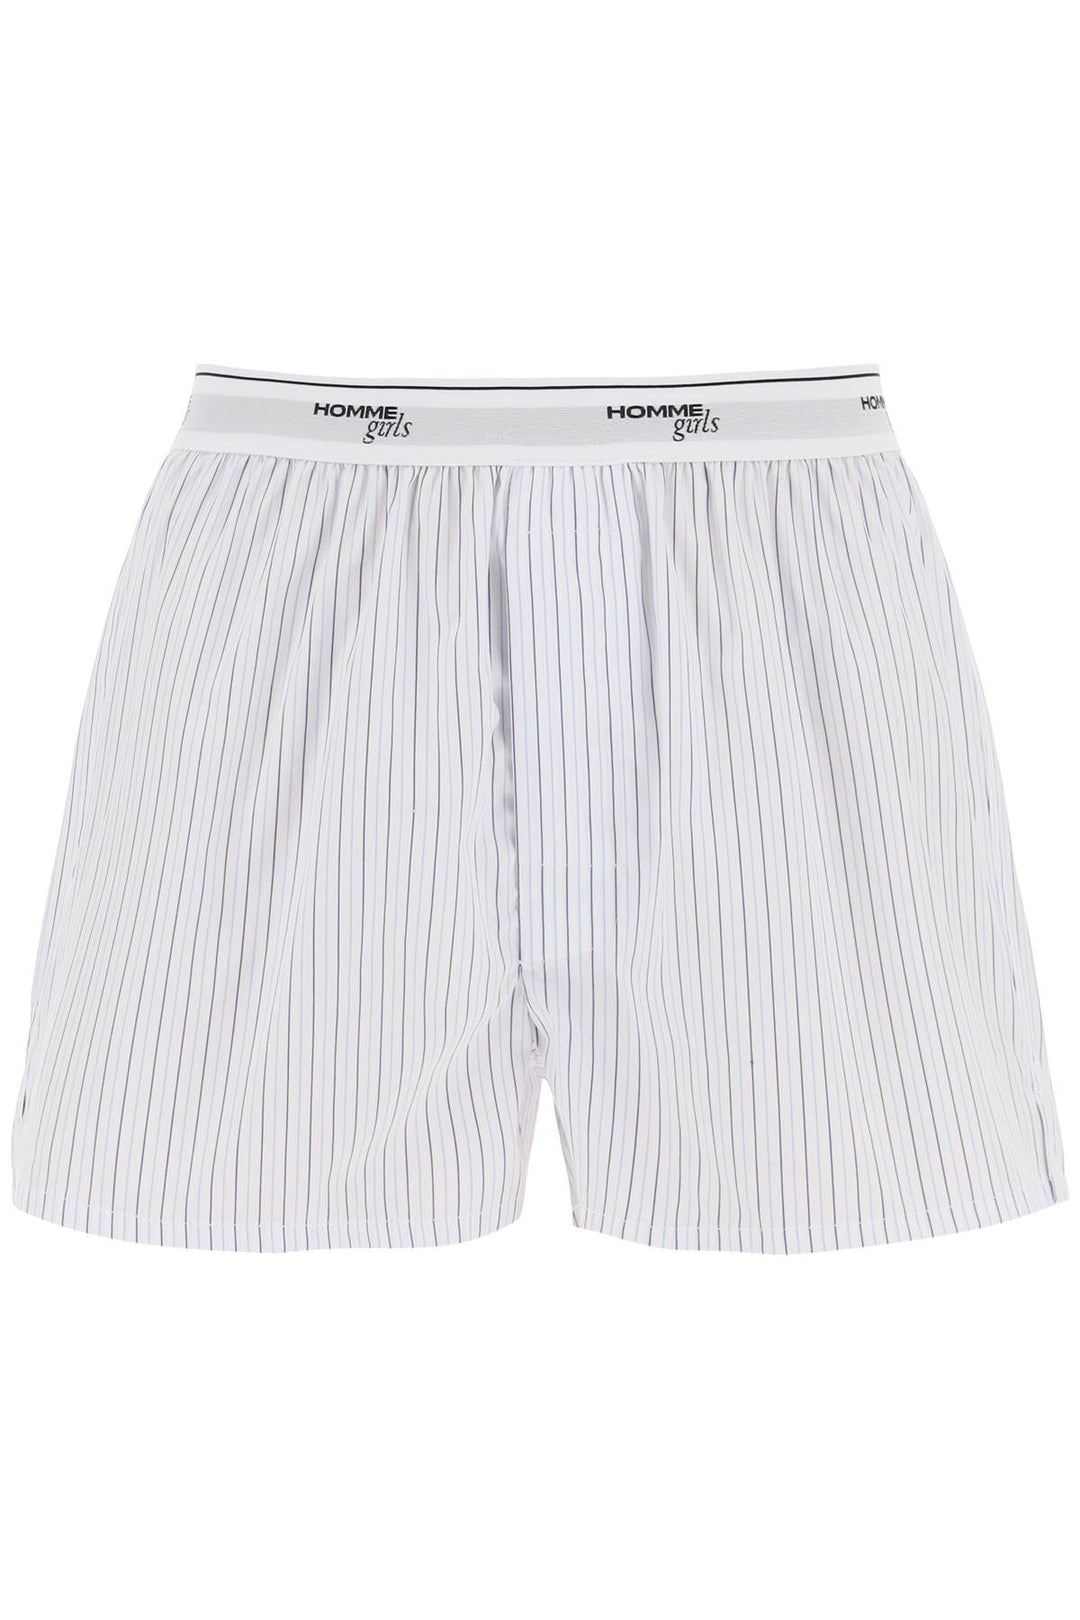 Shorts Boxer In Cotone - Homme Girls - Donna